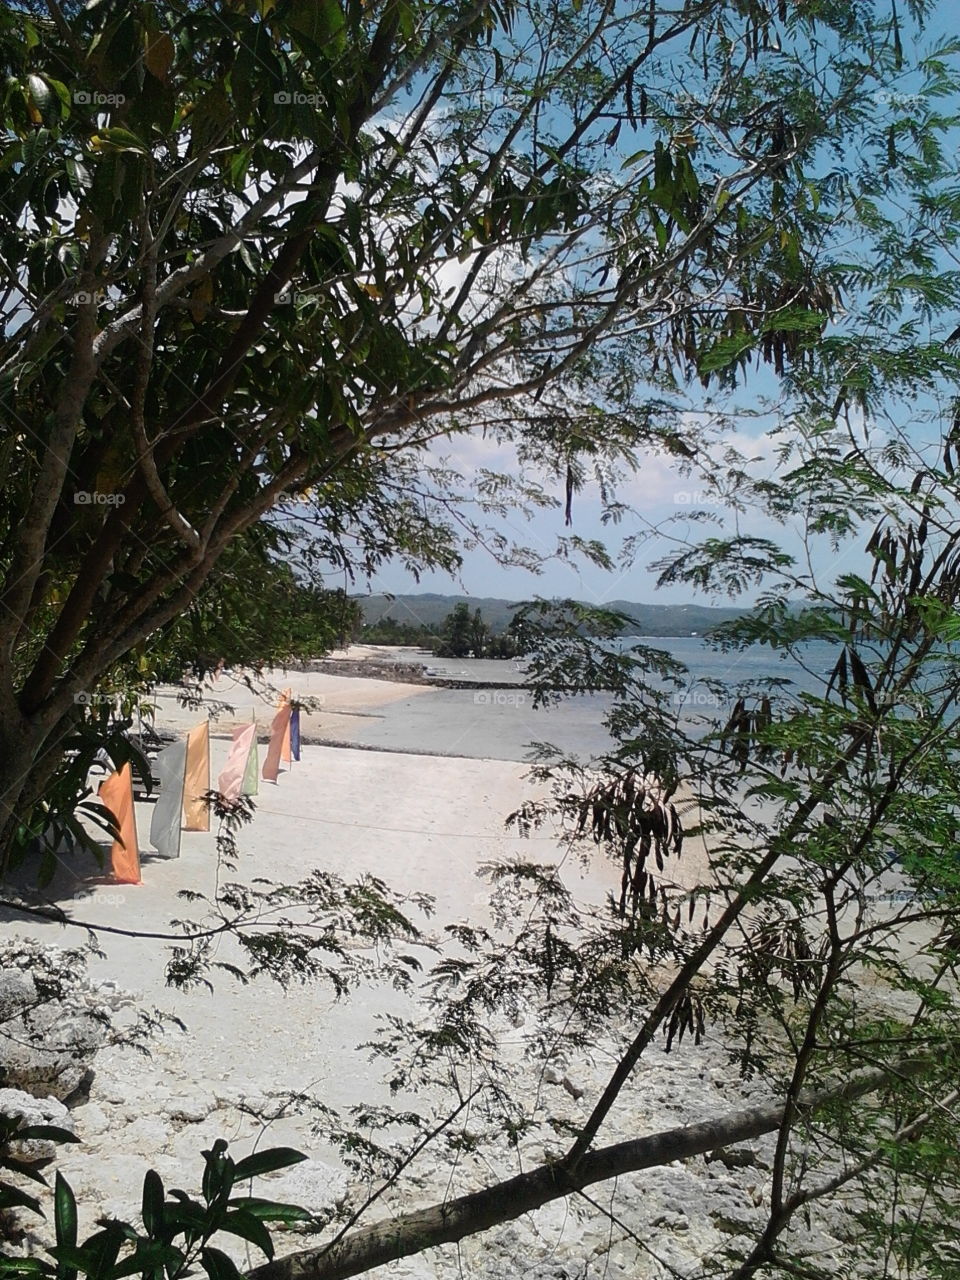 view of the beach sorrounded with trees